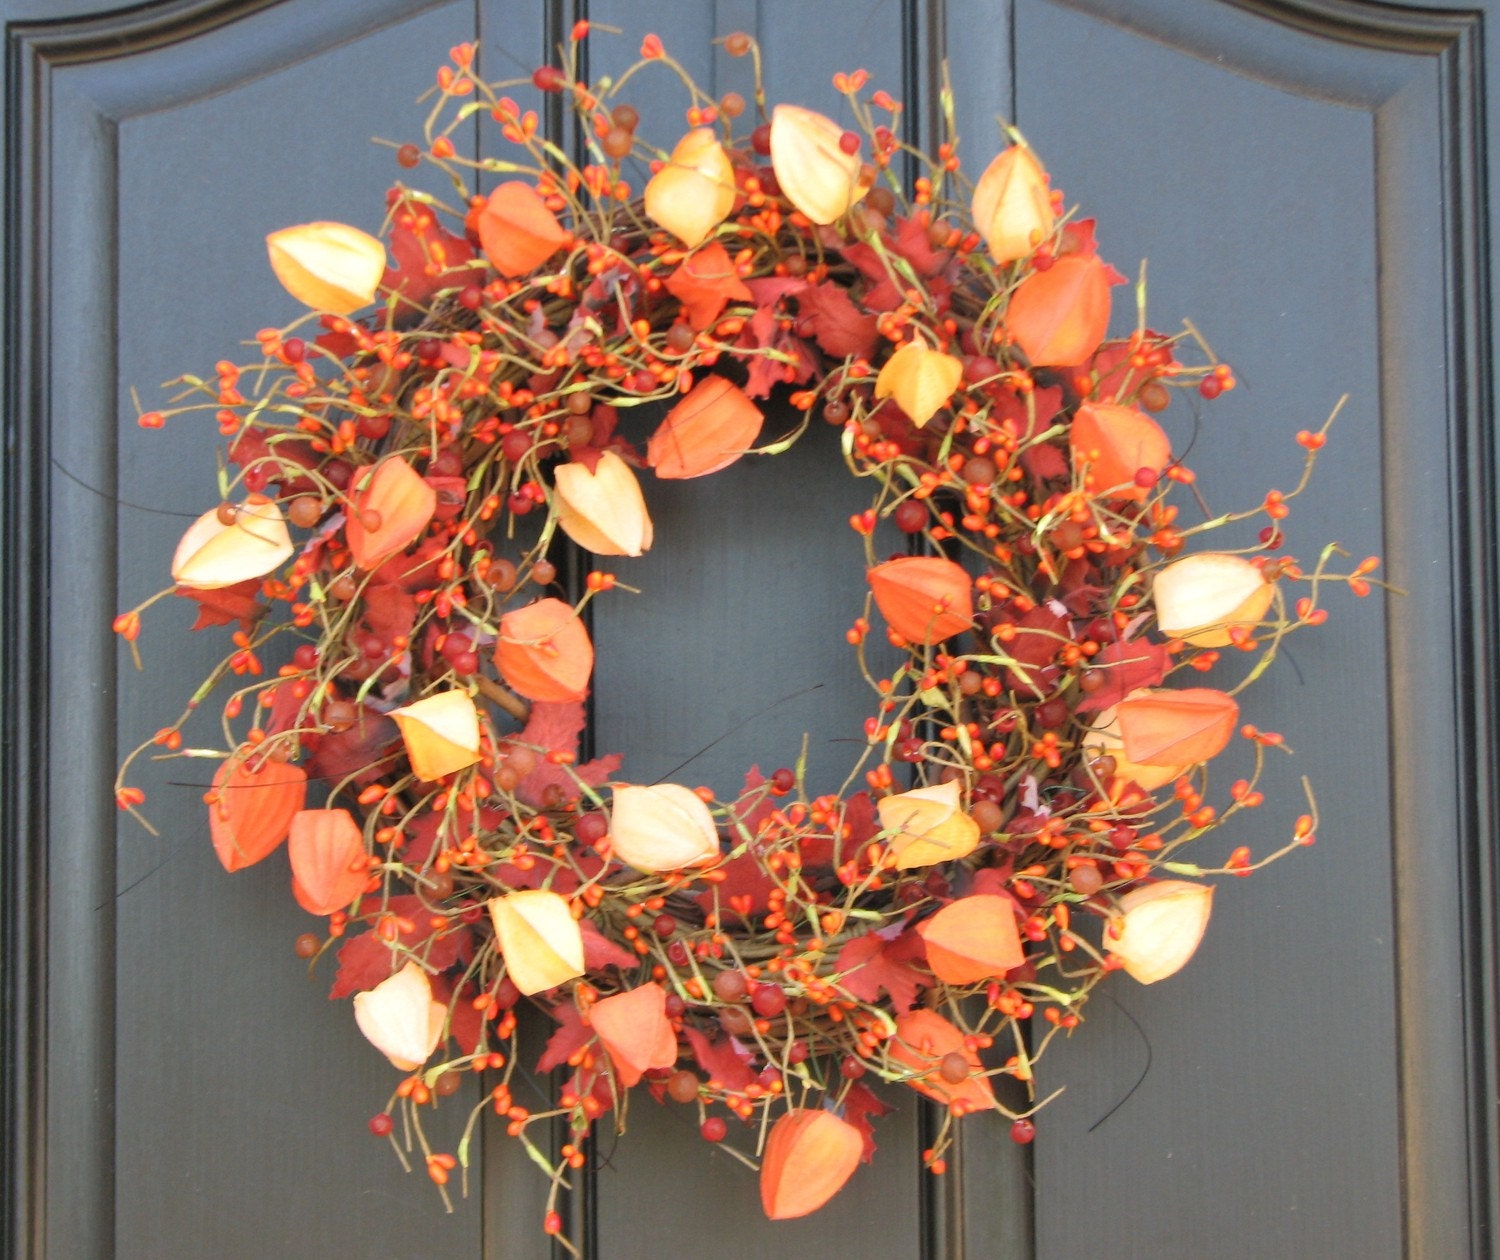 Chinese Lanterns, Gems and Berries Wreath